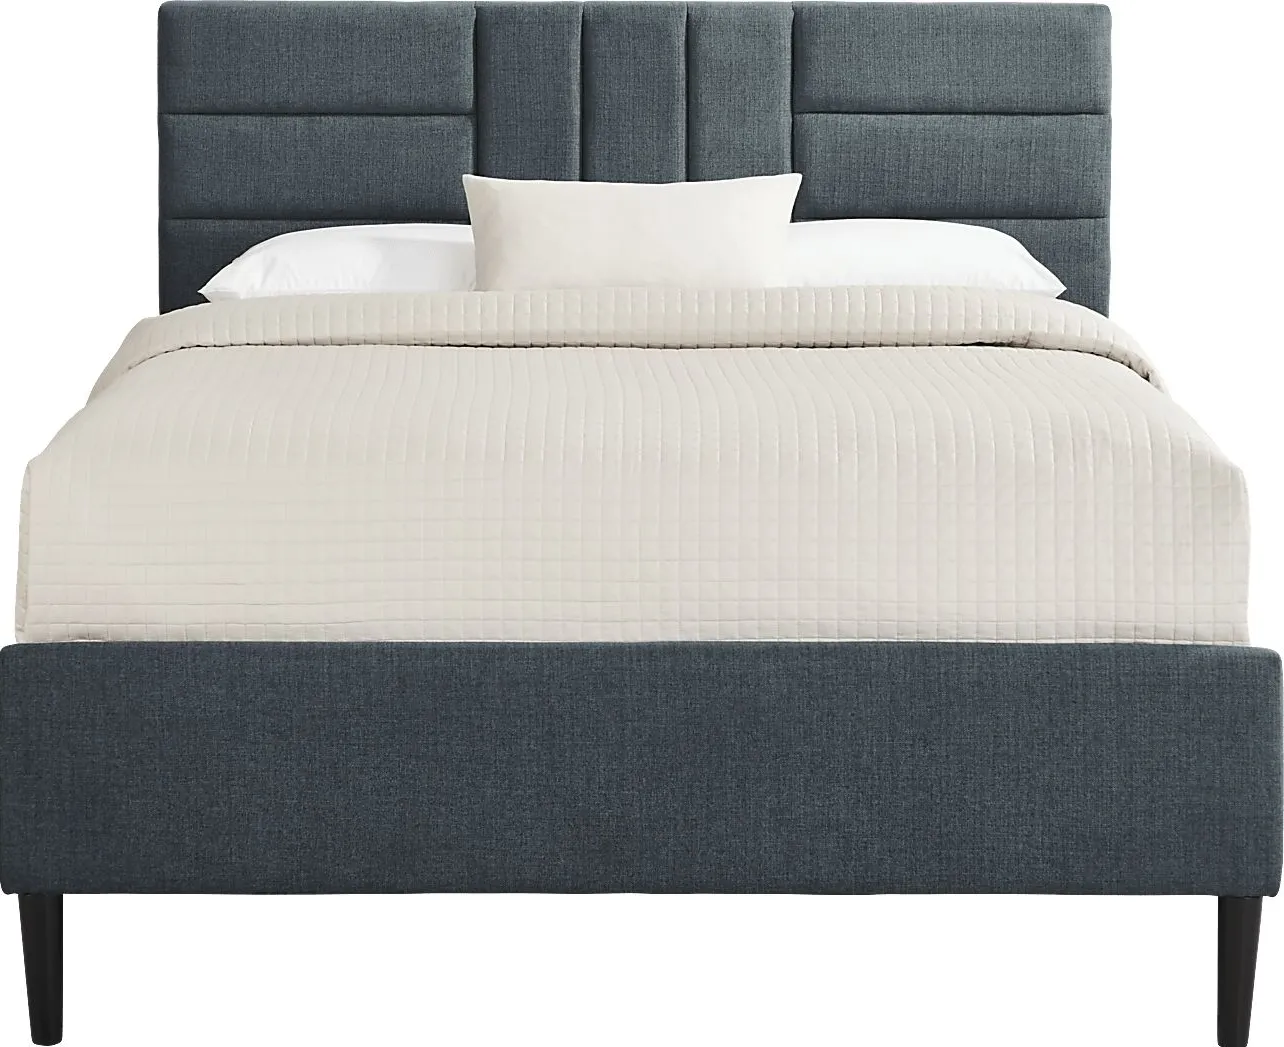 Greystone Heights Blue Queen Bed